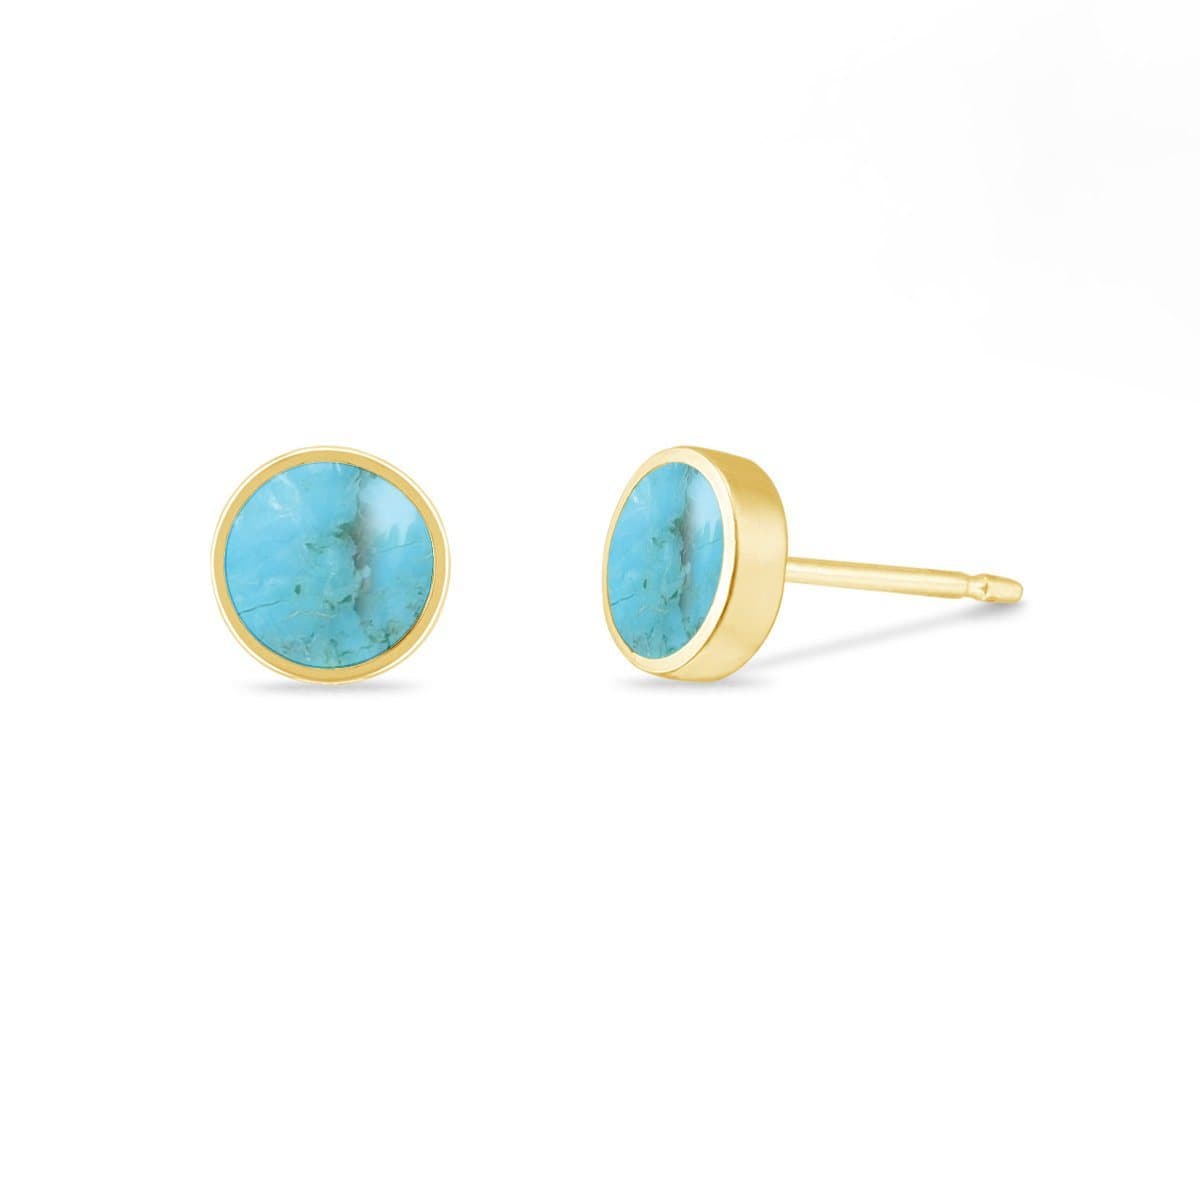 Boma Jewelry Earrings 14K Gold Vermeil with Turquoise Belle Studs with Stone